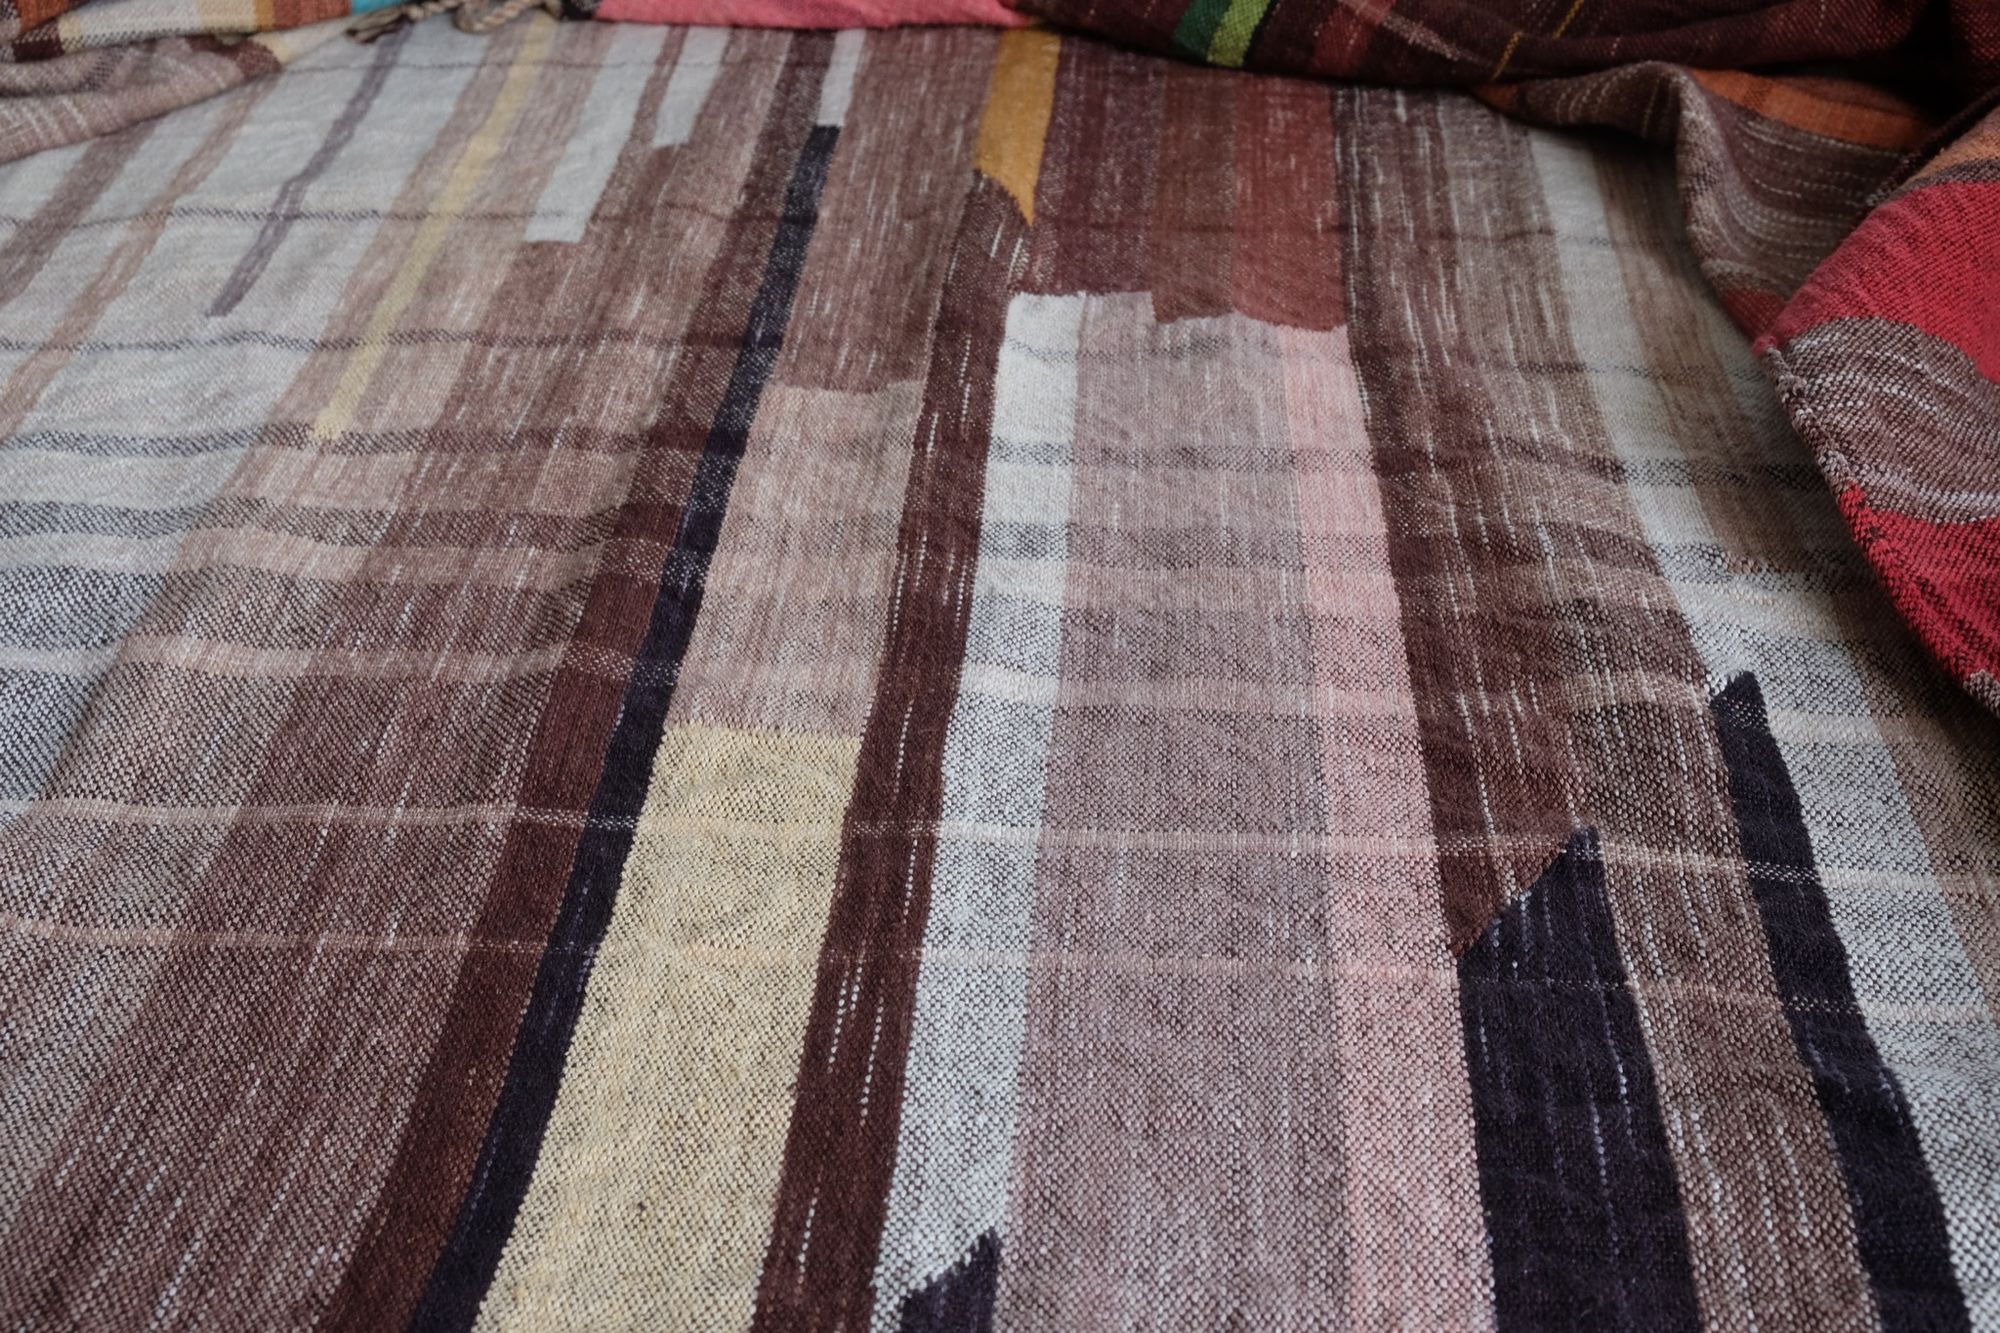 many colored handwoven fabric laying on a wooden floor